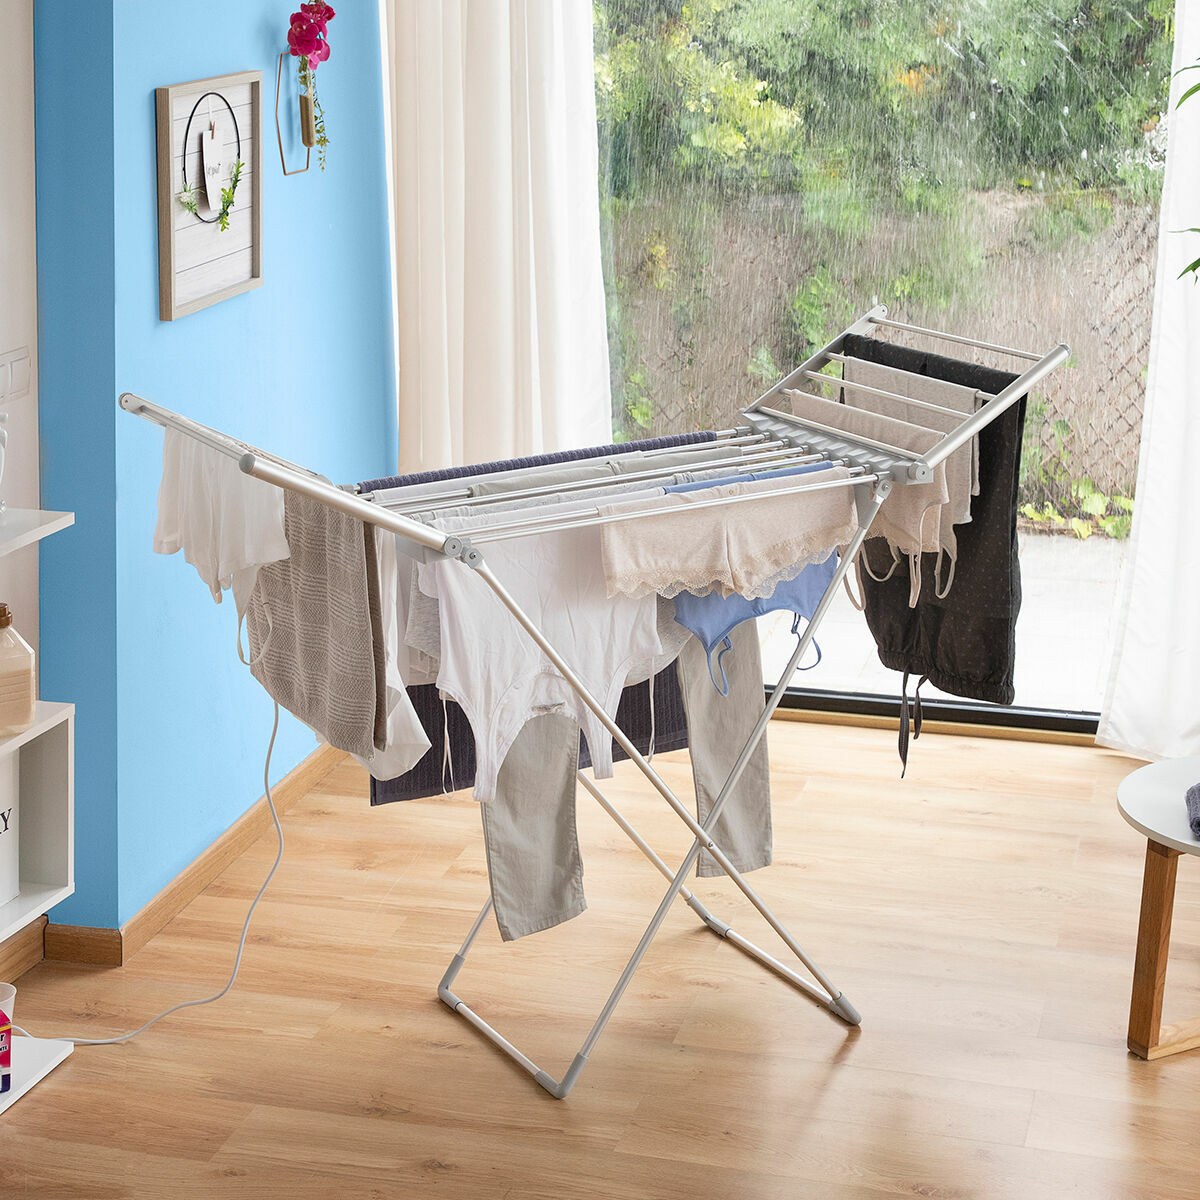 Foldable Clothes Airer 20 Bars Winged Electric Heated Clothes Drying Rack  Towel Warmer X-Legs Indoor Home Horse Rack Electric Dryer, 230W